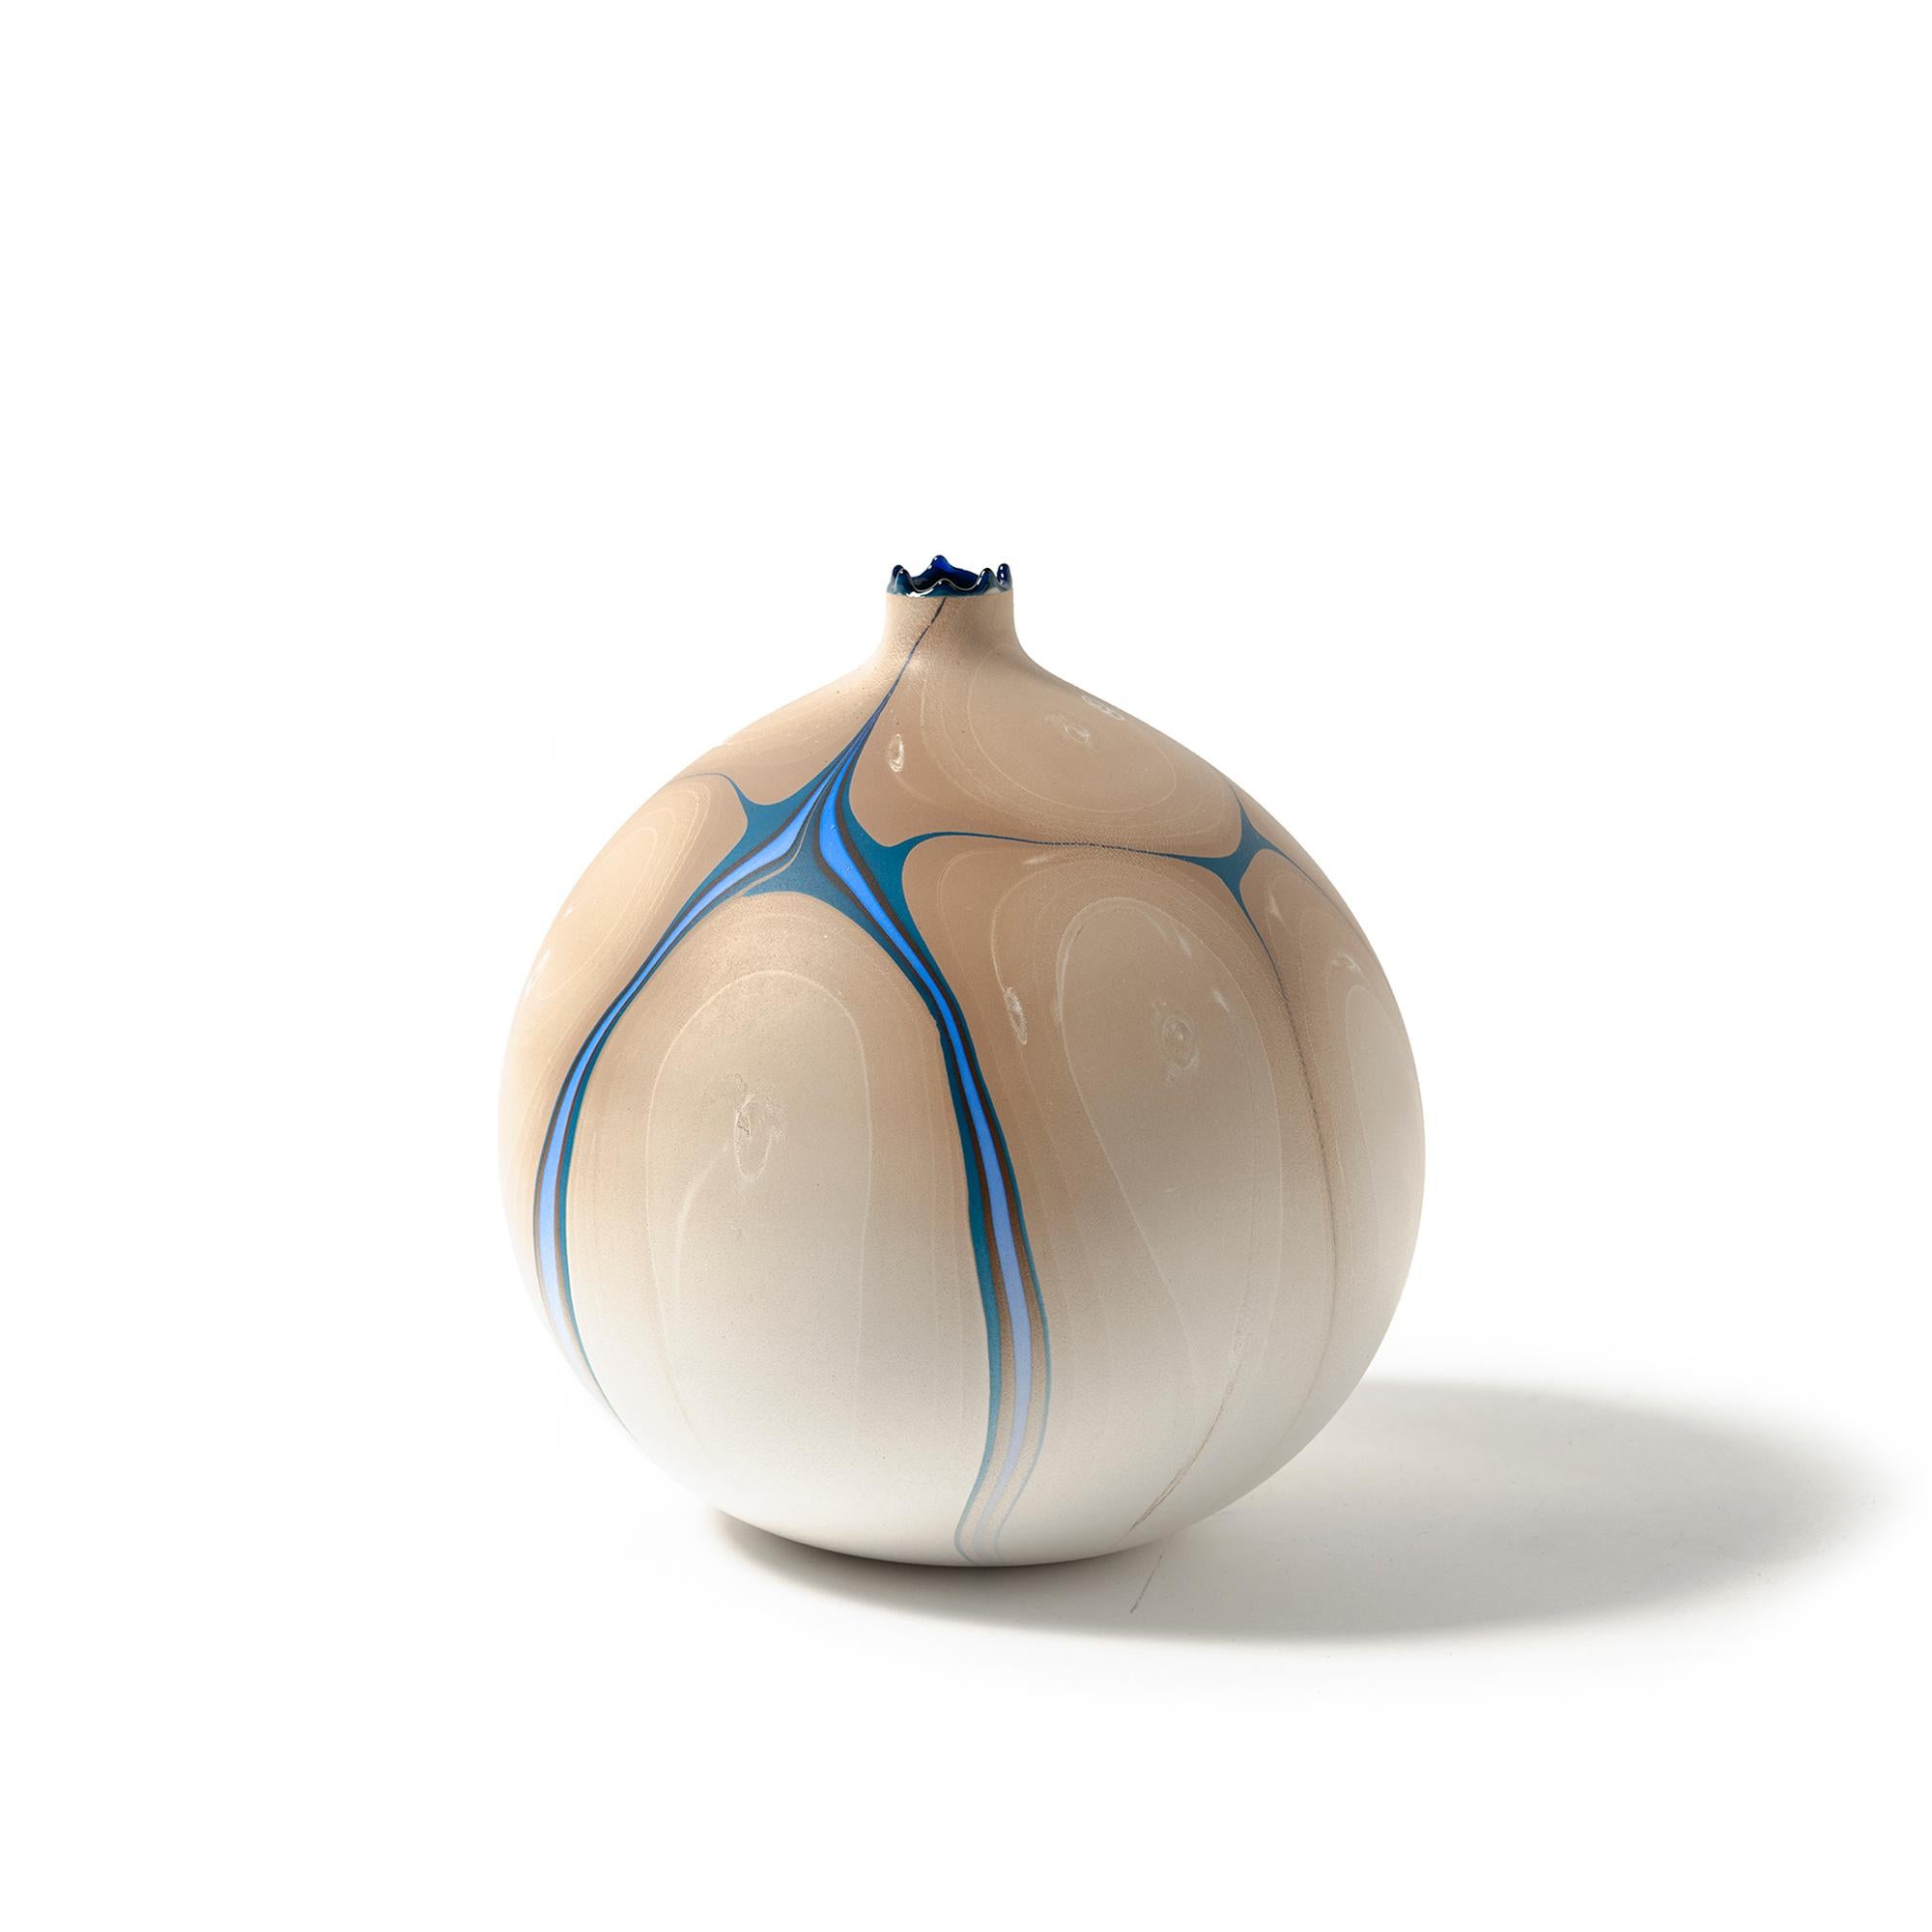 Ganges round hydro vase by Elyse Graham.
Dimensions: W 20 x D 20 x H 23 cm
Materials: Plaster, Resin
MOLDED, DYED, AND FINISHED BY HAND IN LA. CUSTOMIZATION
AVAILABLE.
ALL PIECES ARE MADE TO ORDER

Our new Hydro Vases take on a futuristic